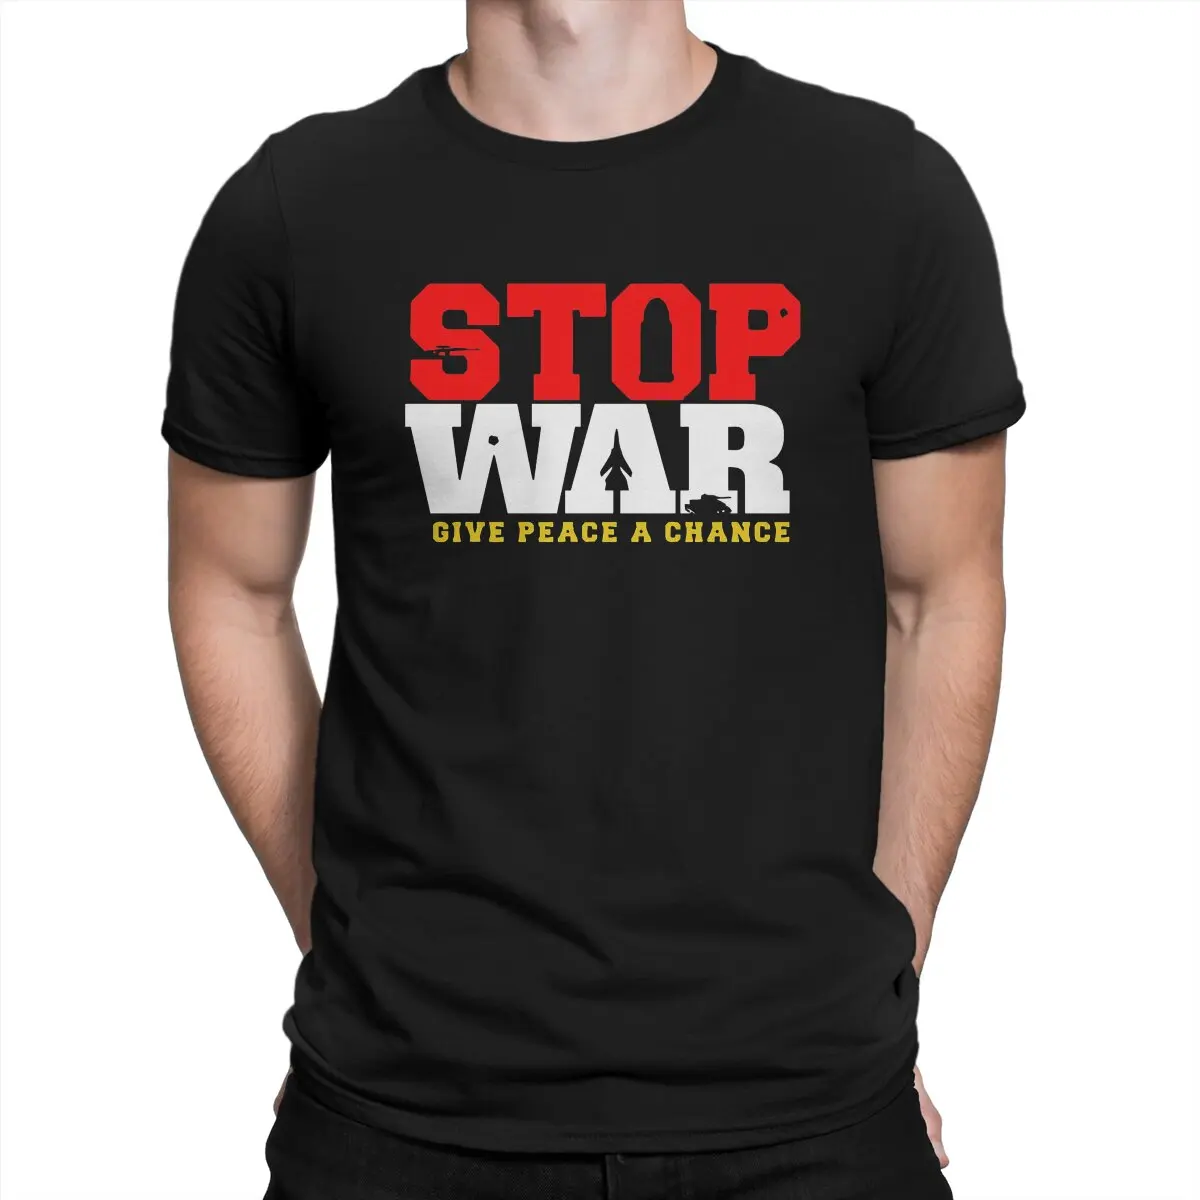 

Crazy Give Peace a Chance T-Shirts for Men Round Collar 100% Cotton T Shirt Stop the Wars No War Short Sleeve Tee Shirt